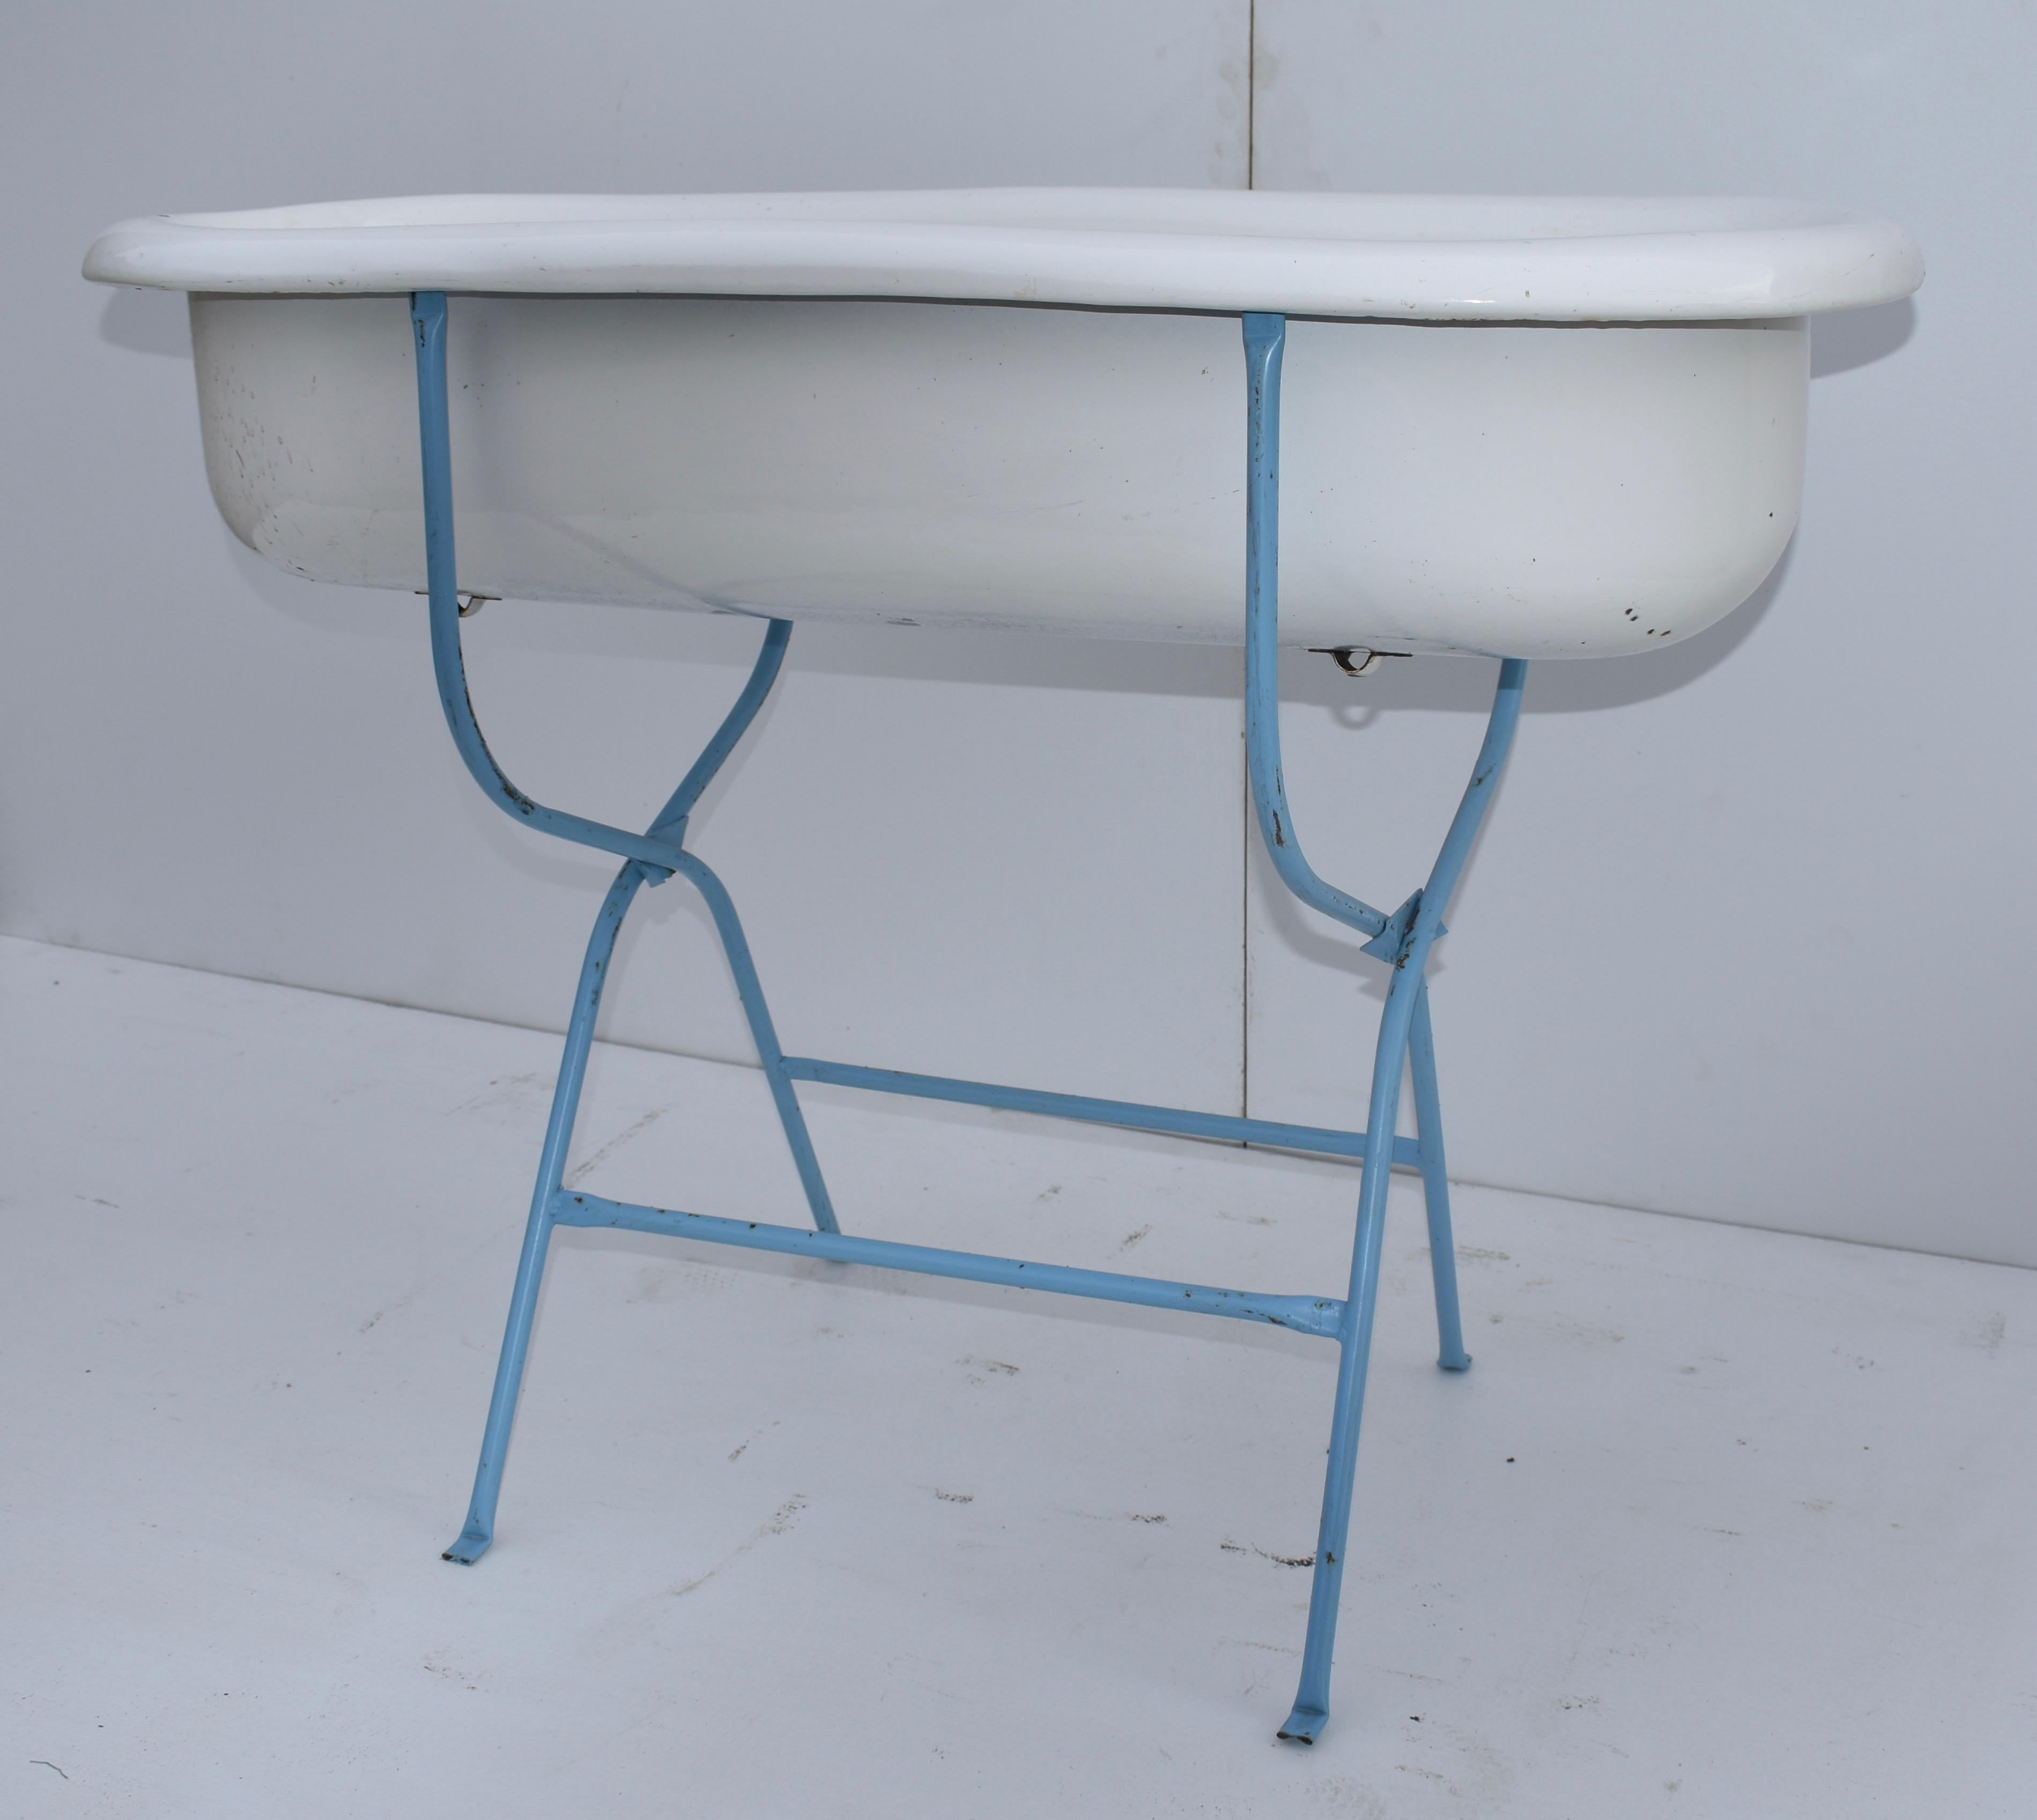 Hungarian Porcelain Enamel Baby Bath on Stand